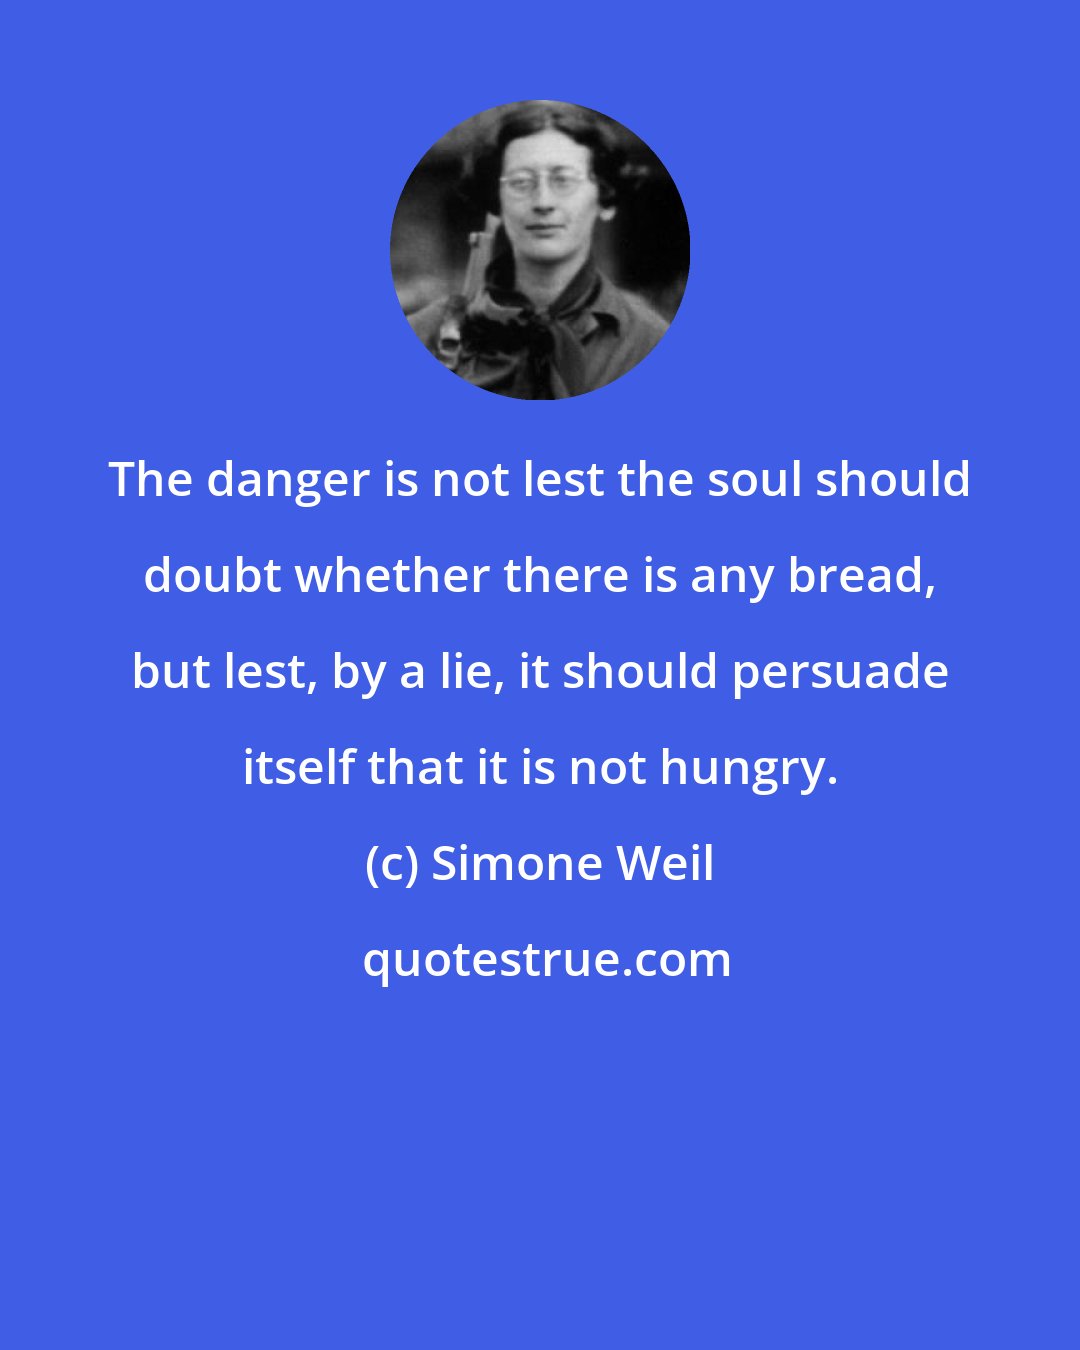 Simone Weil: The danger is not lest the soul should doubt whether there is any bread, but lest, by a lie, it should persuade itself that it is not hungry.